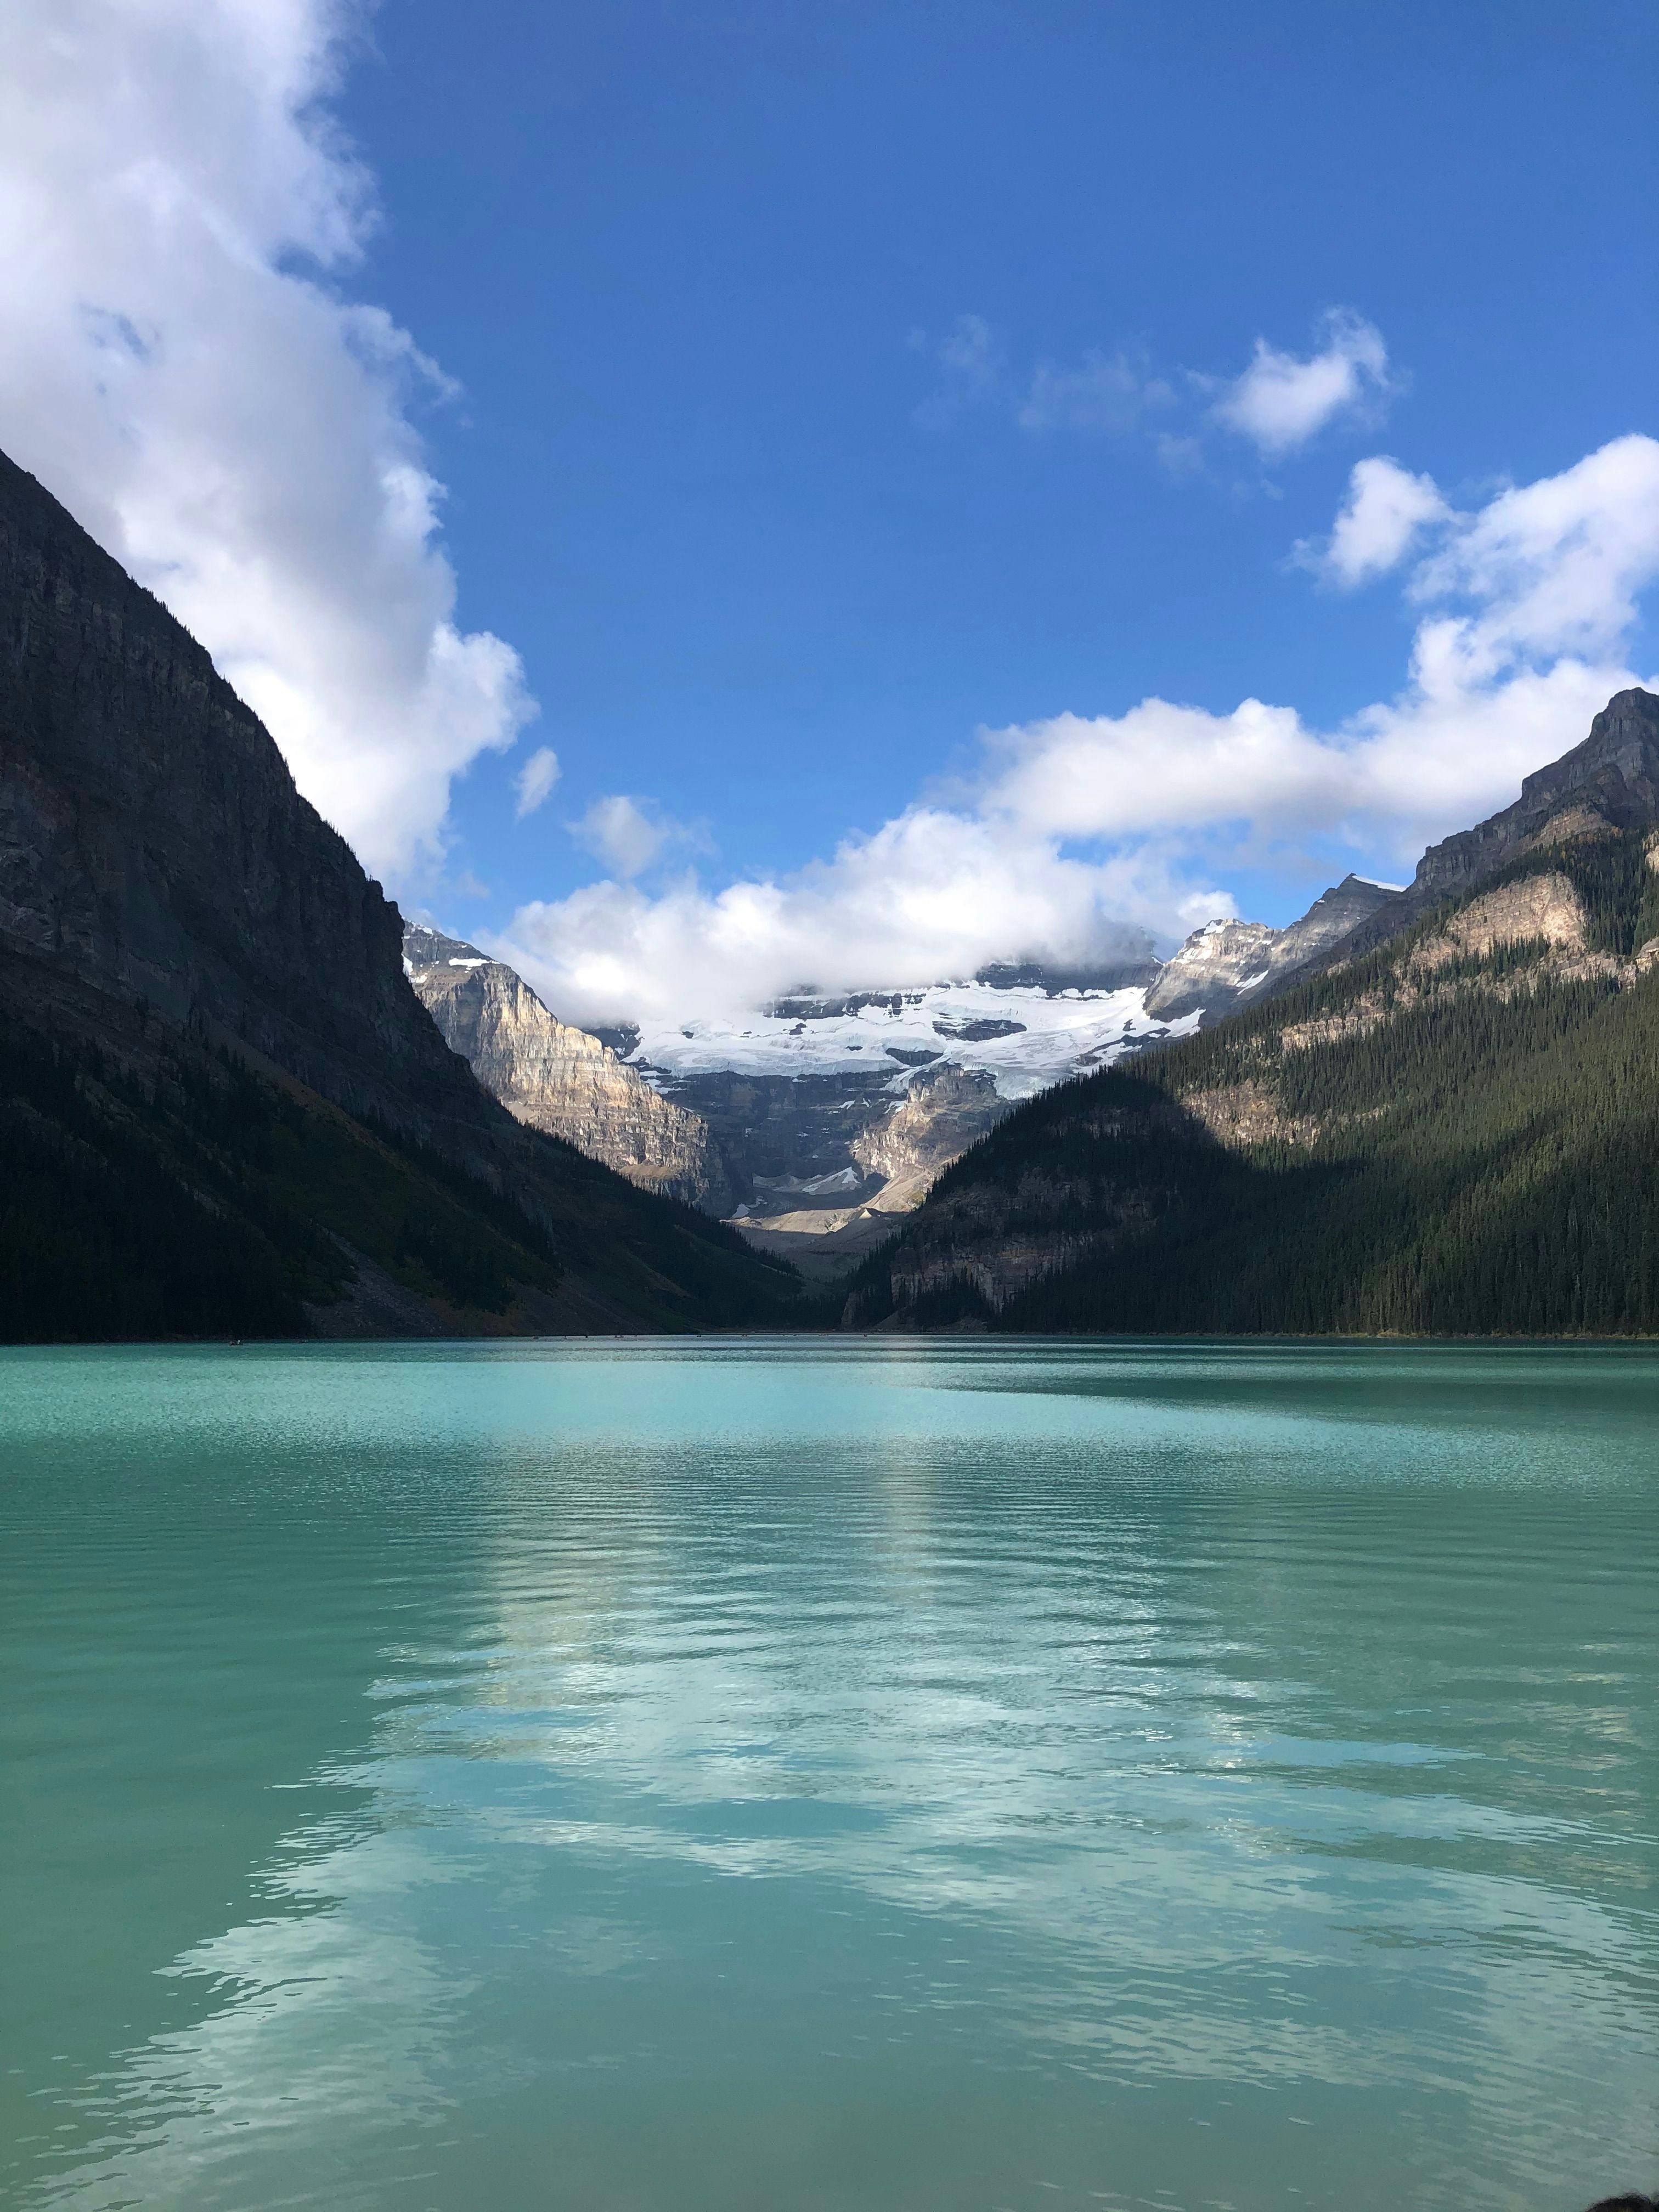 Image 1 of Rent a canoe at Lake Louise .